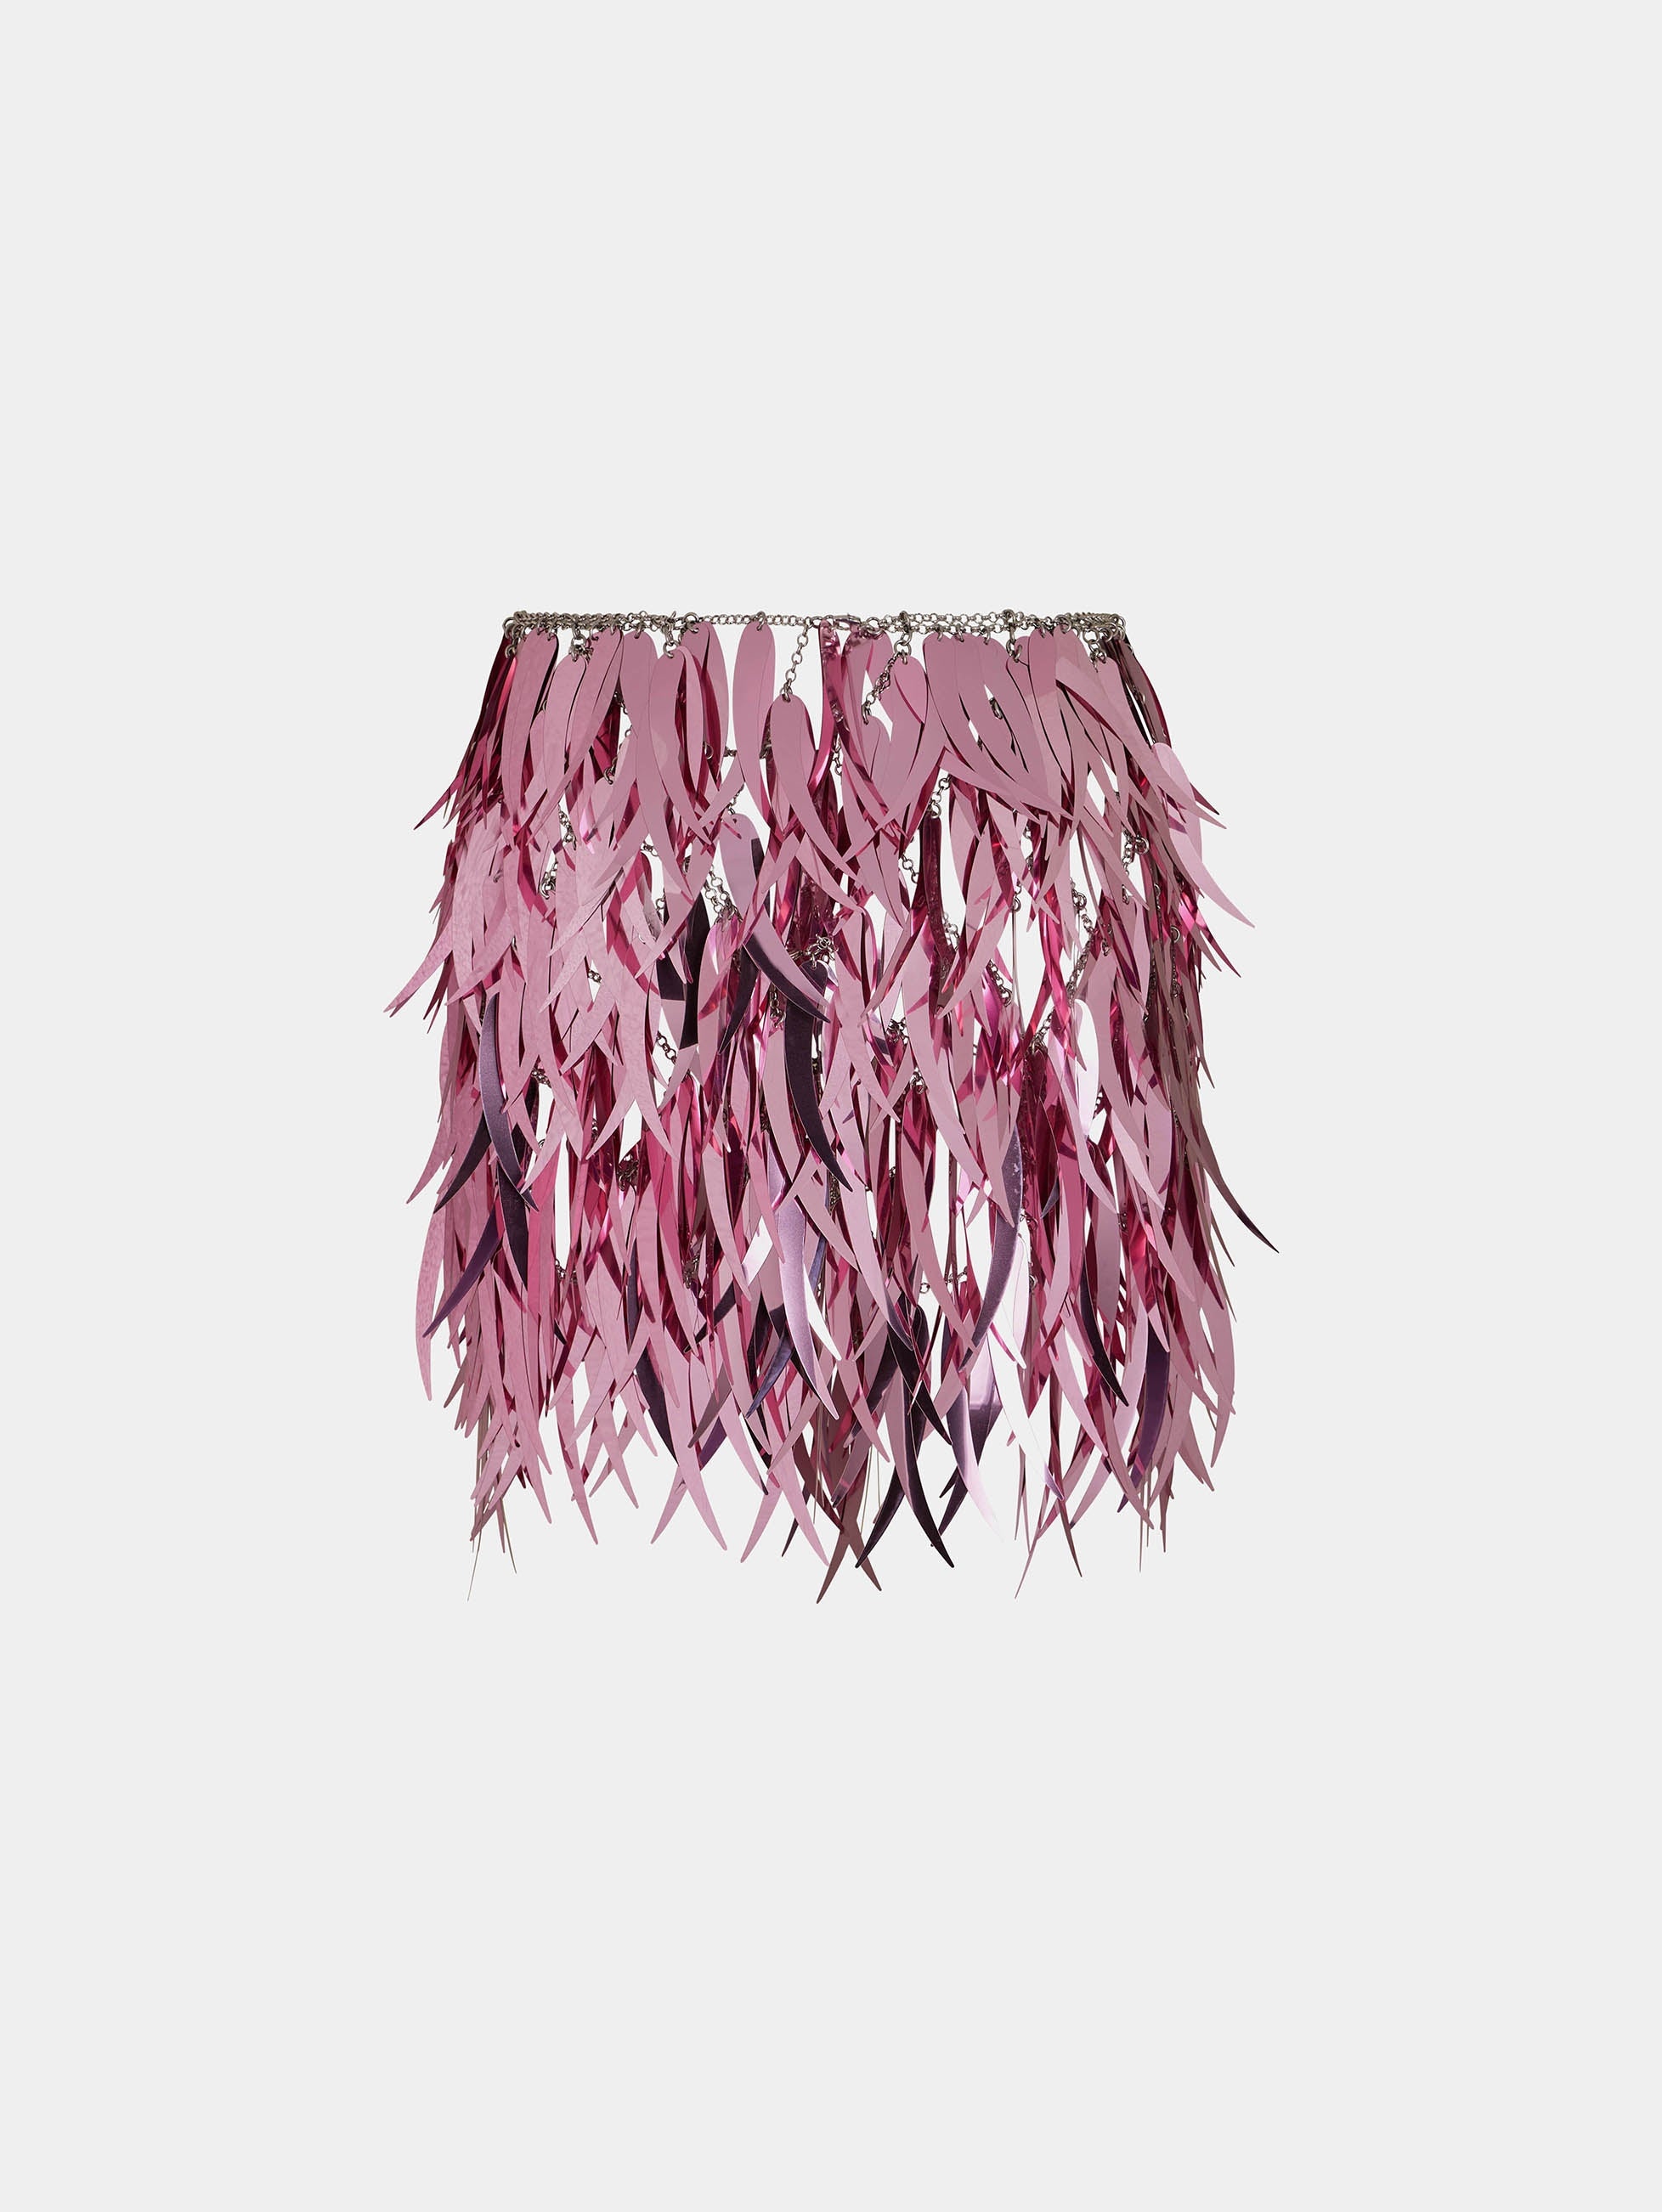 PINK SKIRT WITH A METALLIC FEATHERS ASSEMBLAGE - 1